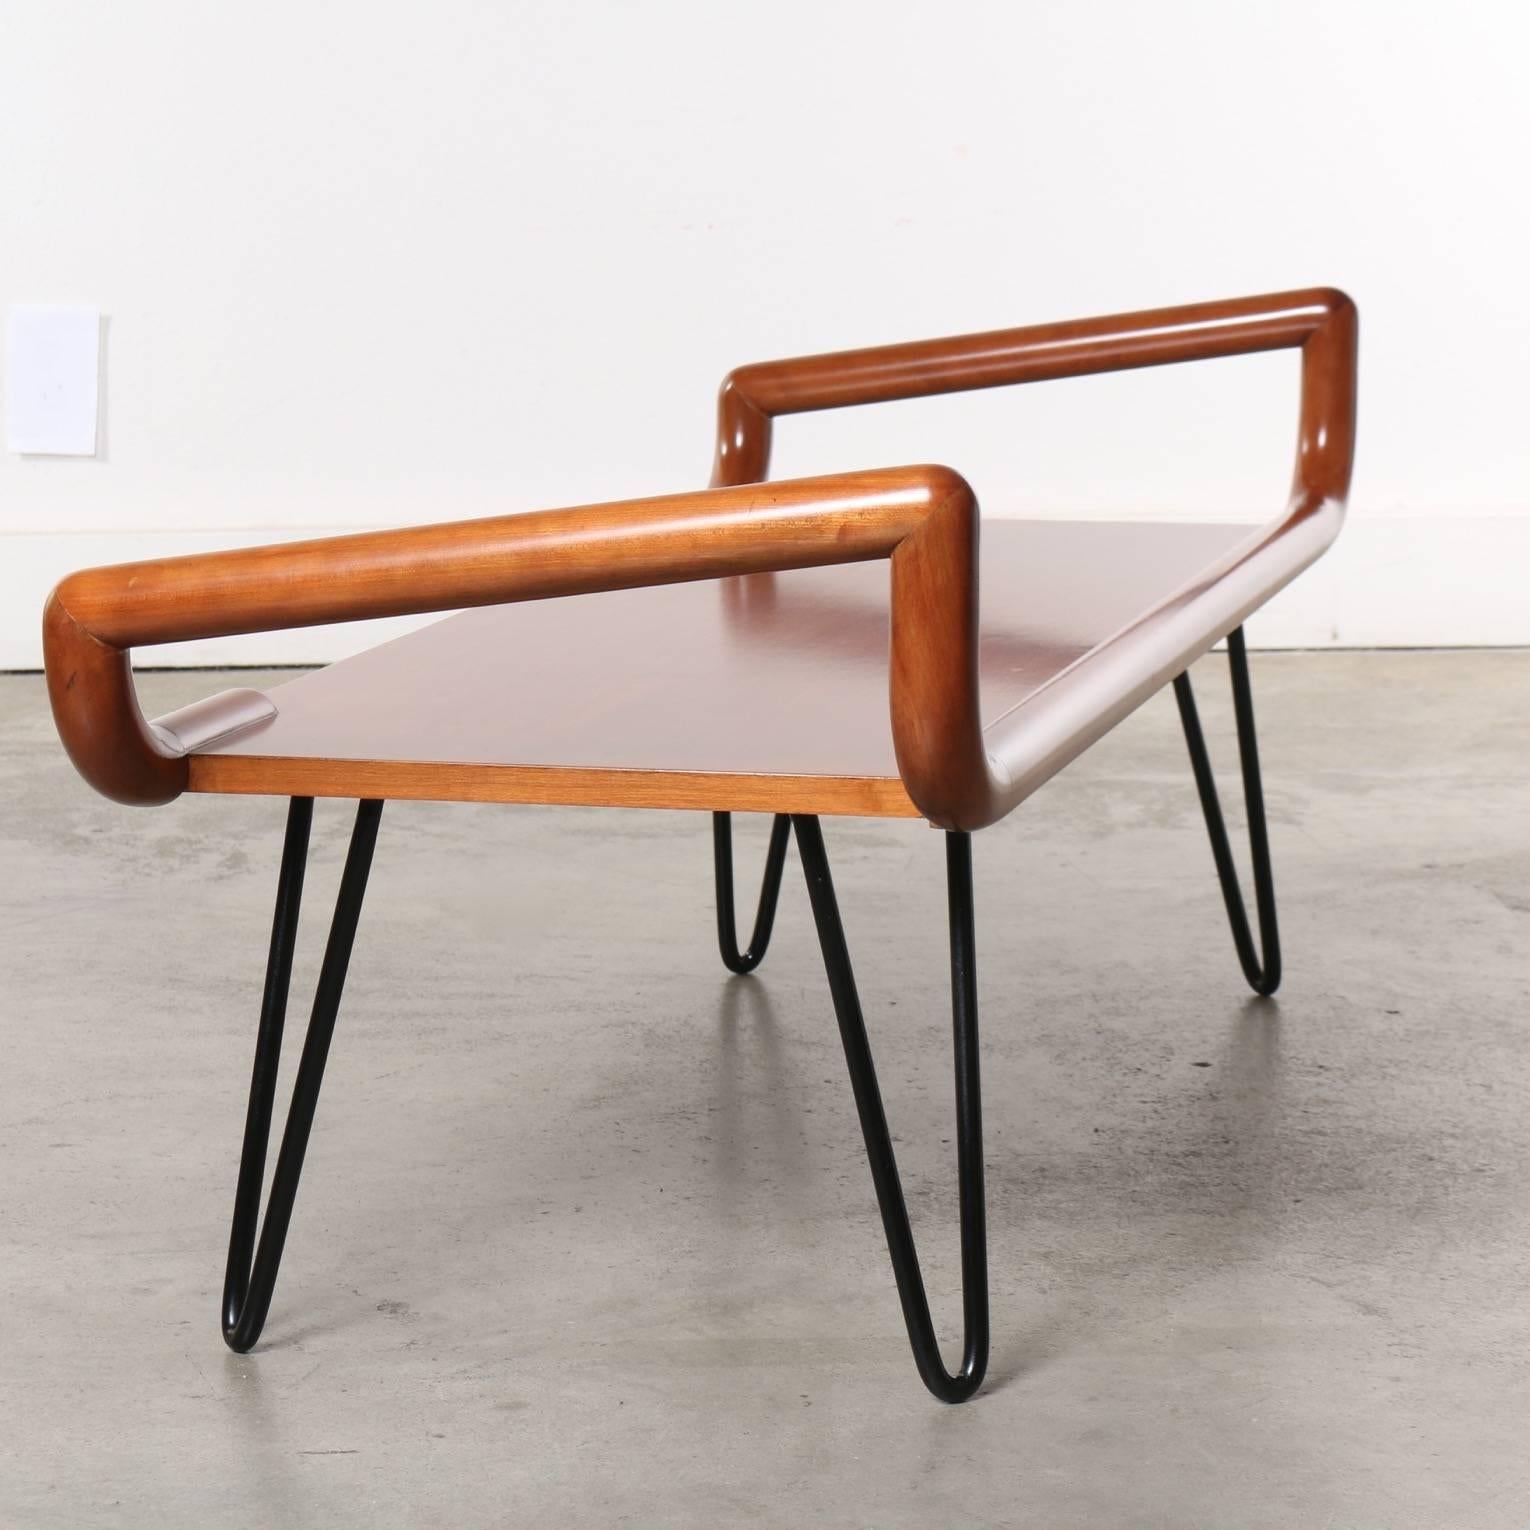 Mid-Century Modern Midcentury Table or Bench with Hairpin Legs